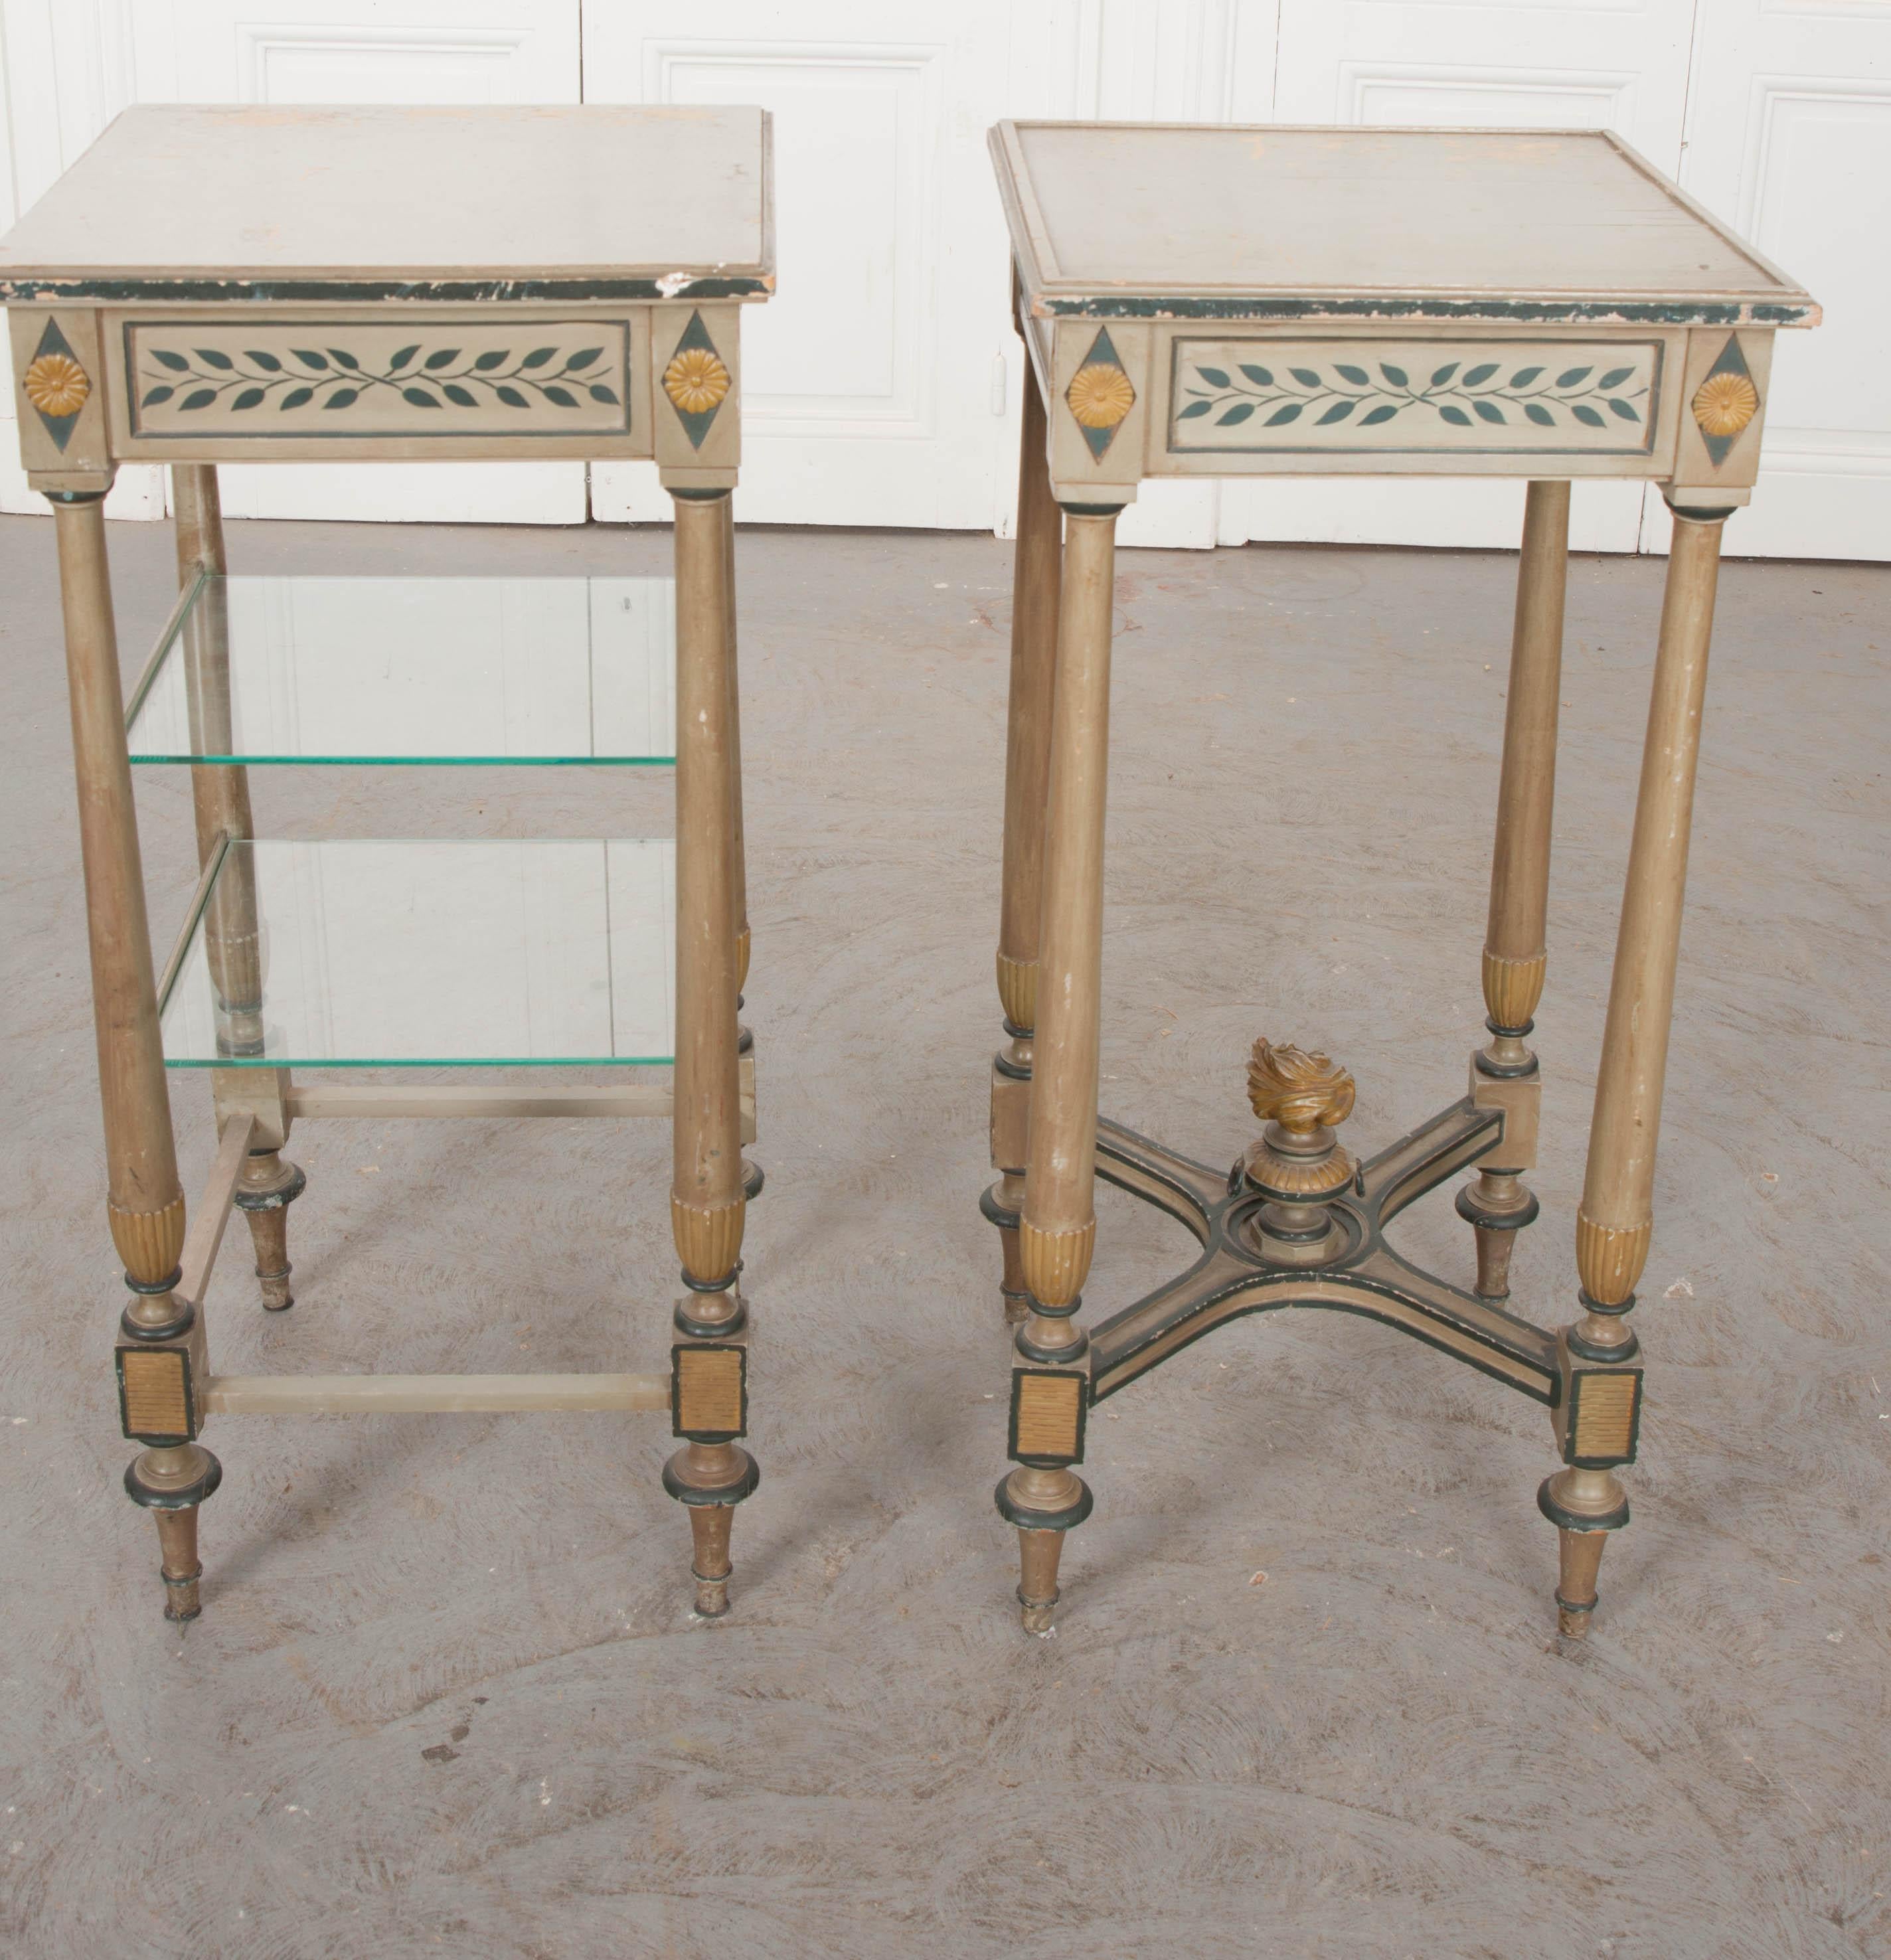 These two delightful crème-painted Dutch side tables, circa 1910s, share the same leaf-and-rosette motifs and will pair well together. Each having a single drawer, however, one has been outfitted with a pair of glass shelves and the other has a